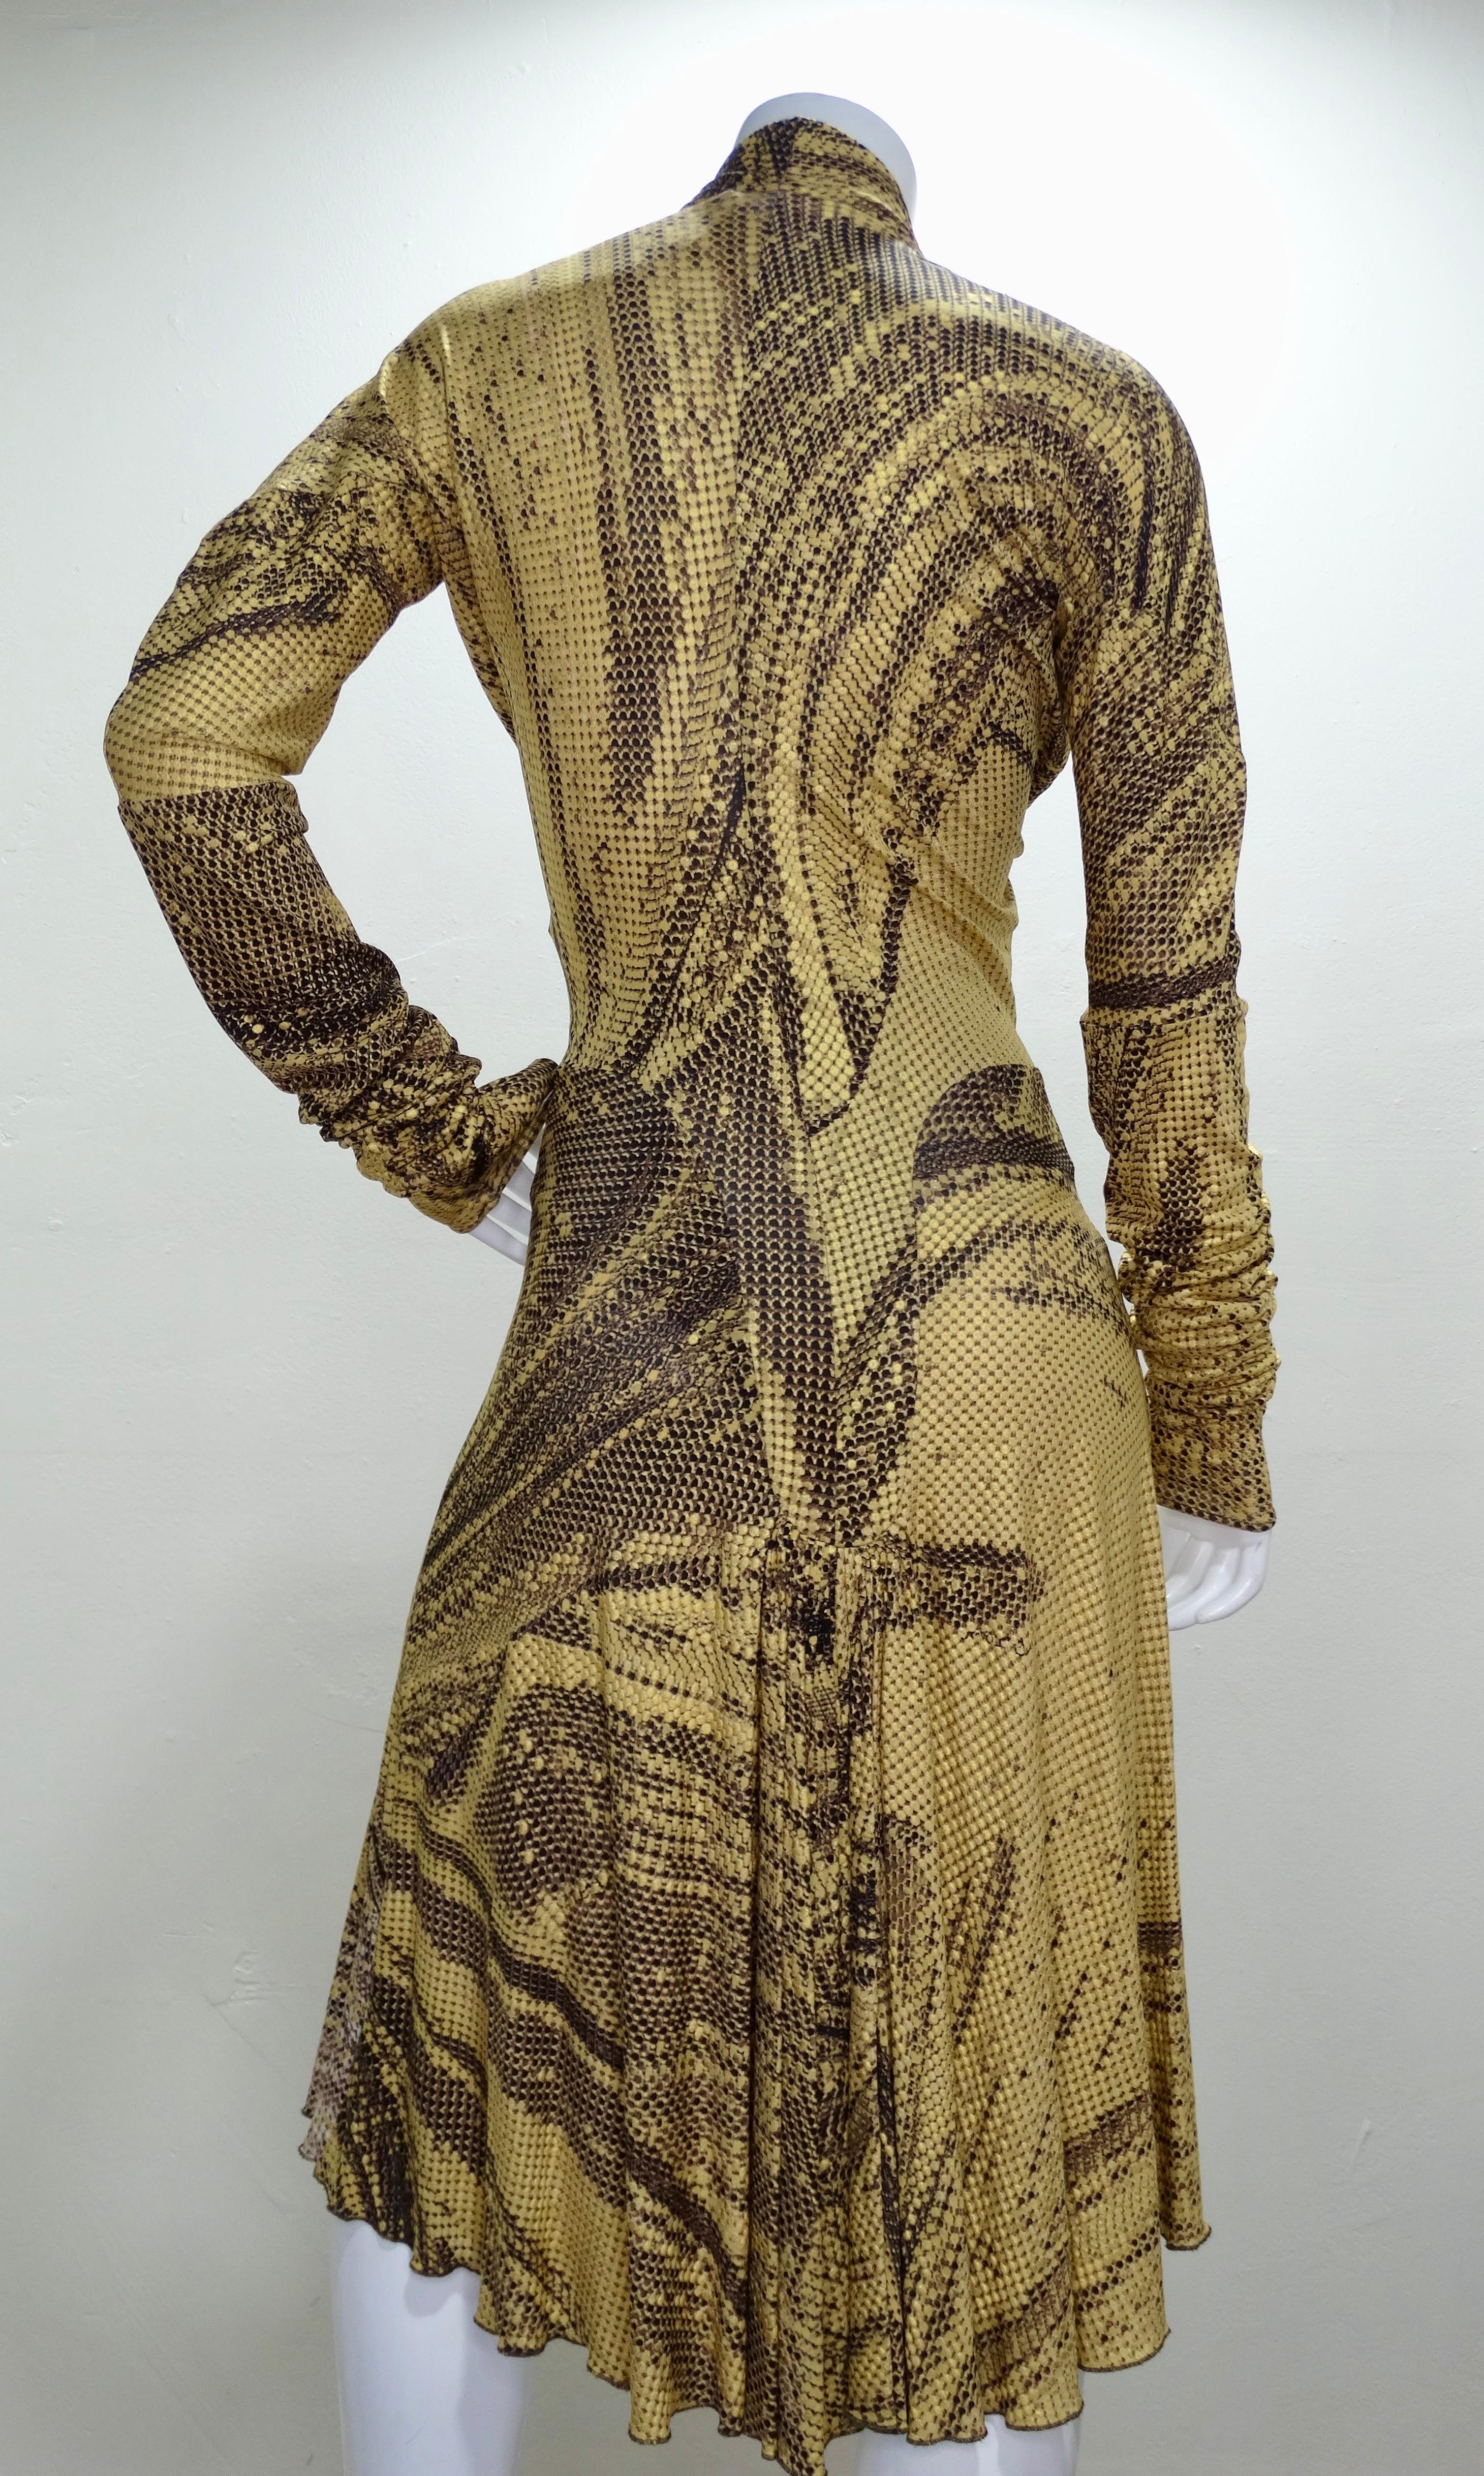 Roberto Cavalli Snake Print Dress  In Excellent Condition For Sale In Scottsdale, AZ